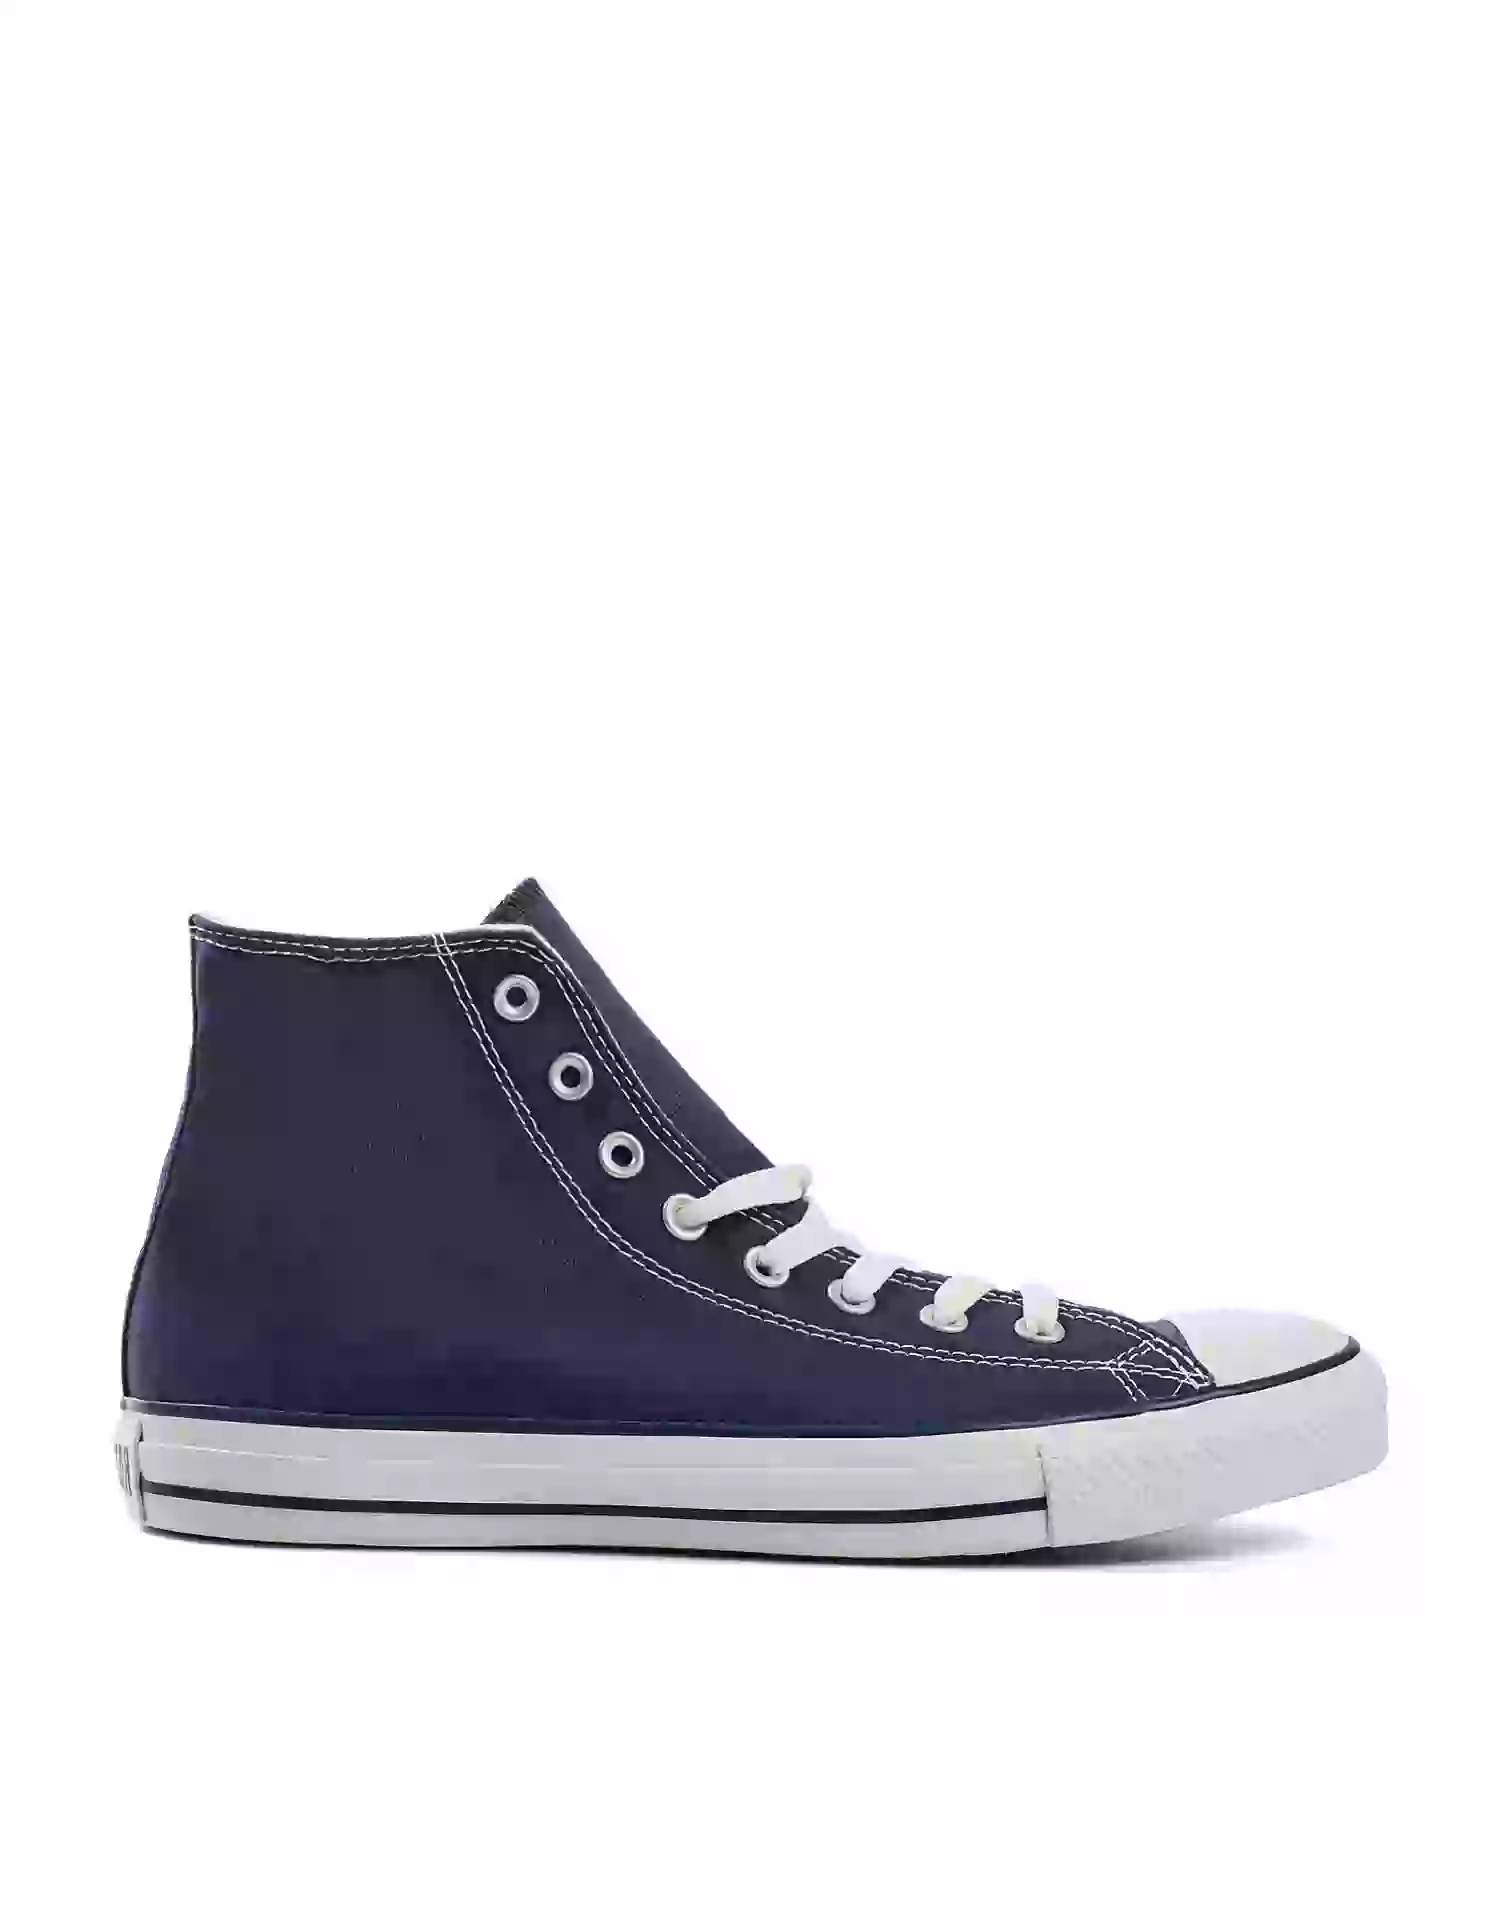 Converse All Star Canvas Hi Sneakers Navy